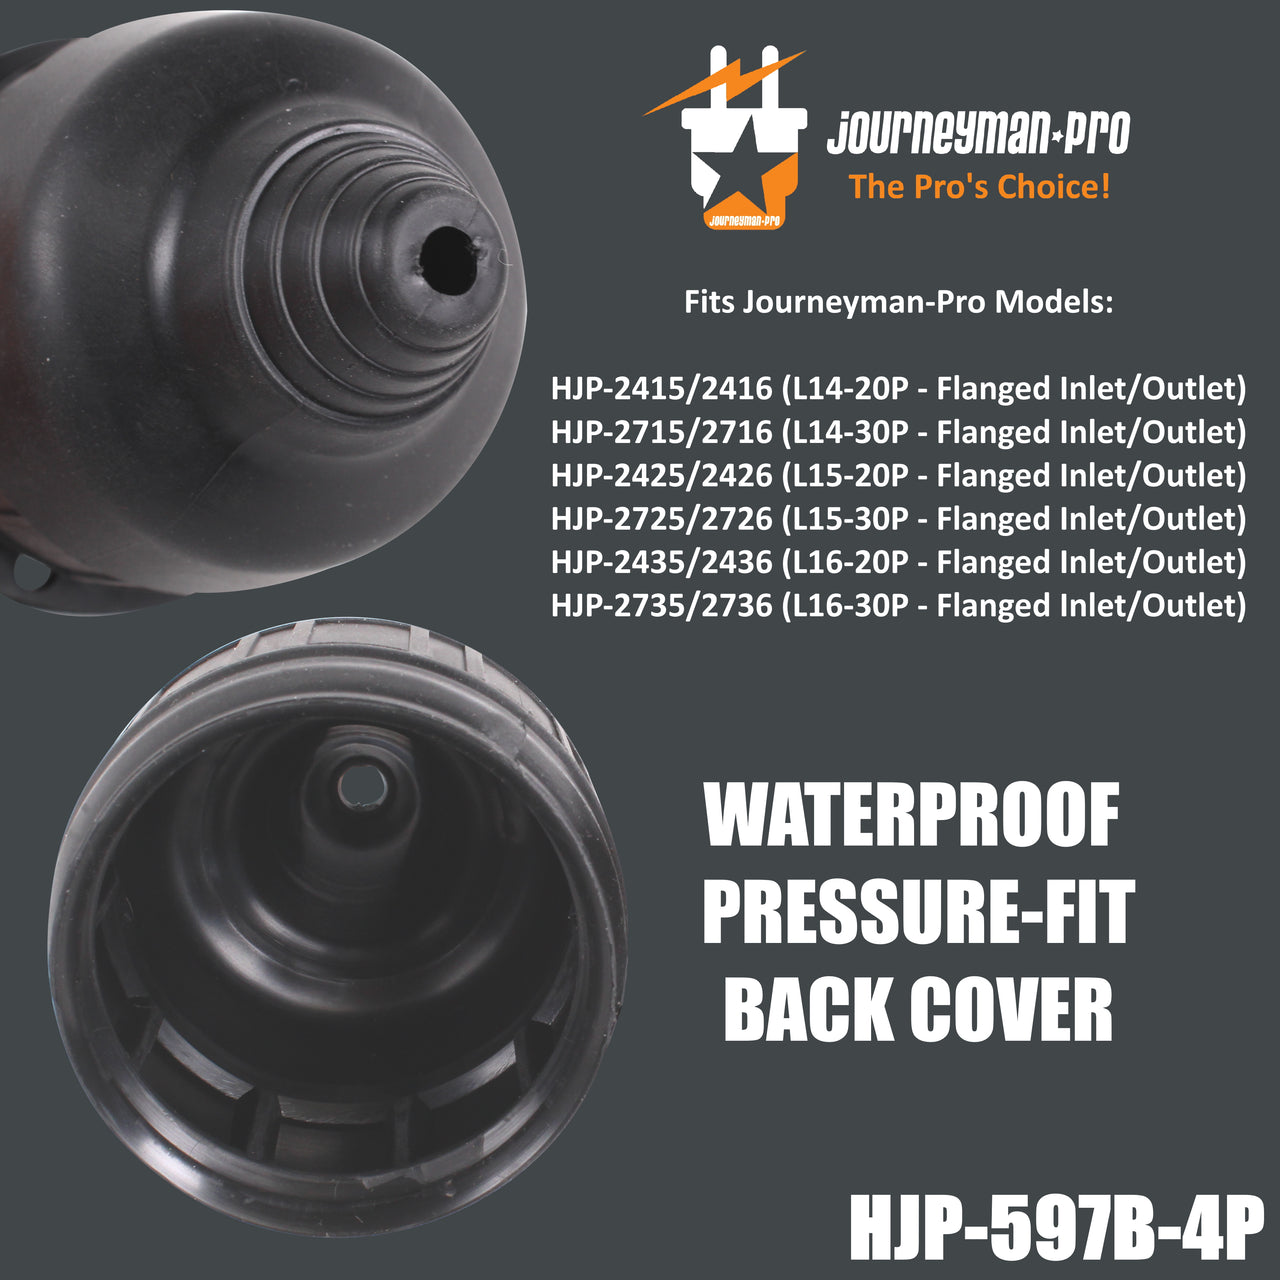 4P Flanged Inlet/Outlet Back Rubber Cover for 4 Pole style Inlets & Outlets, waterproof terminal cover fits 20/30 Amp L14, L15, L16